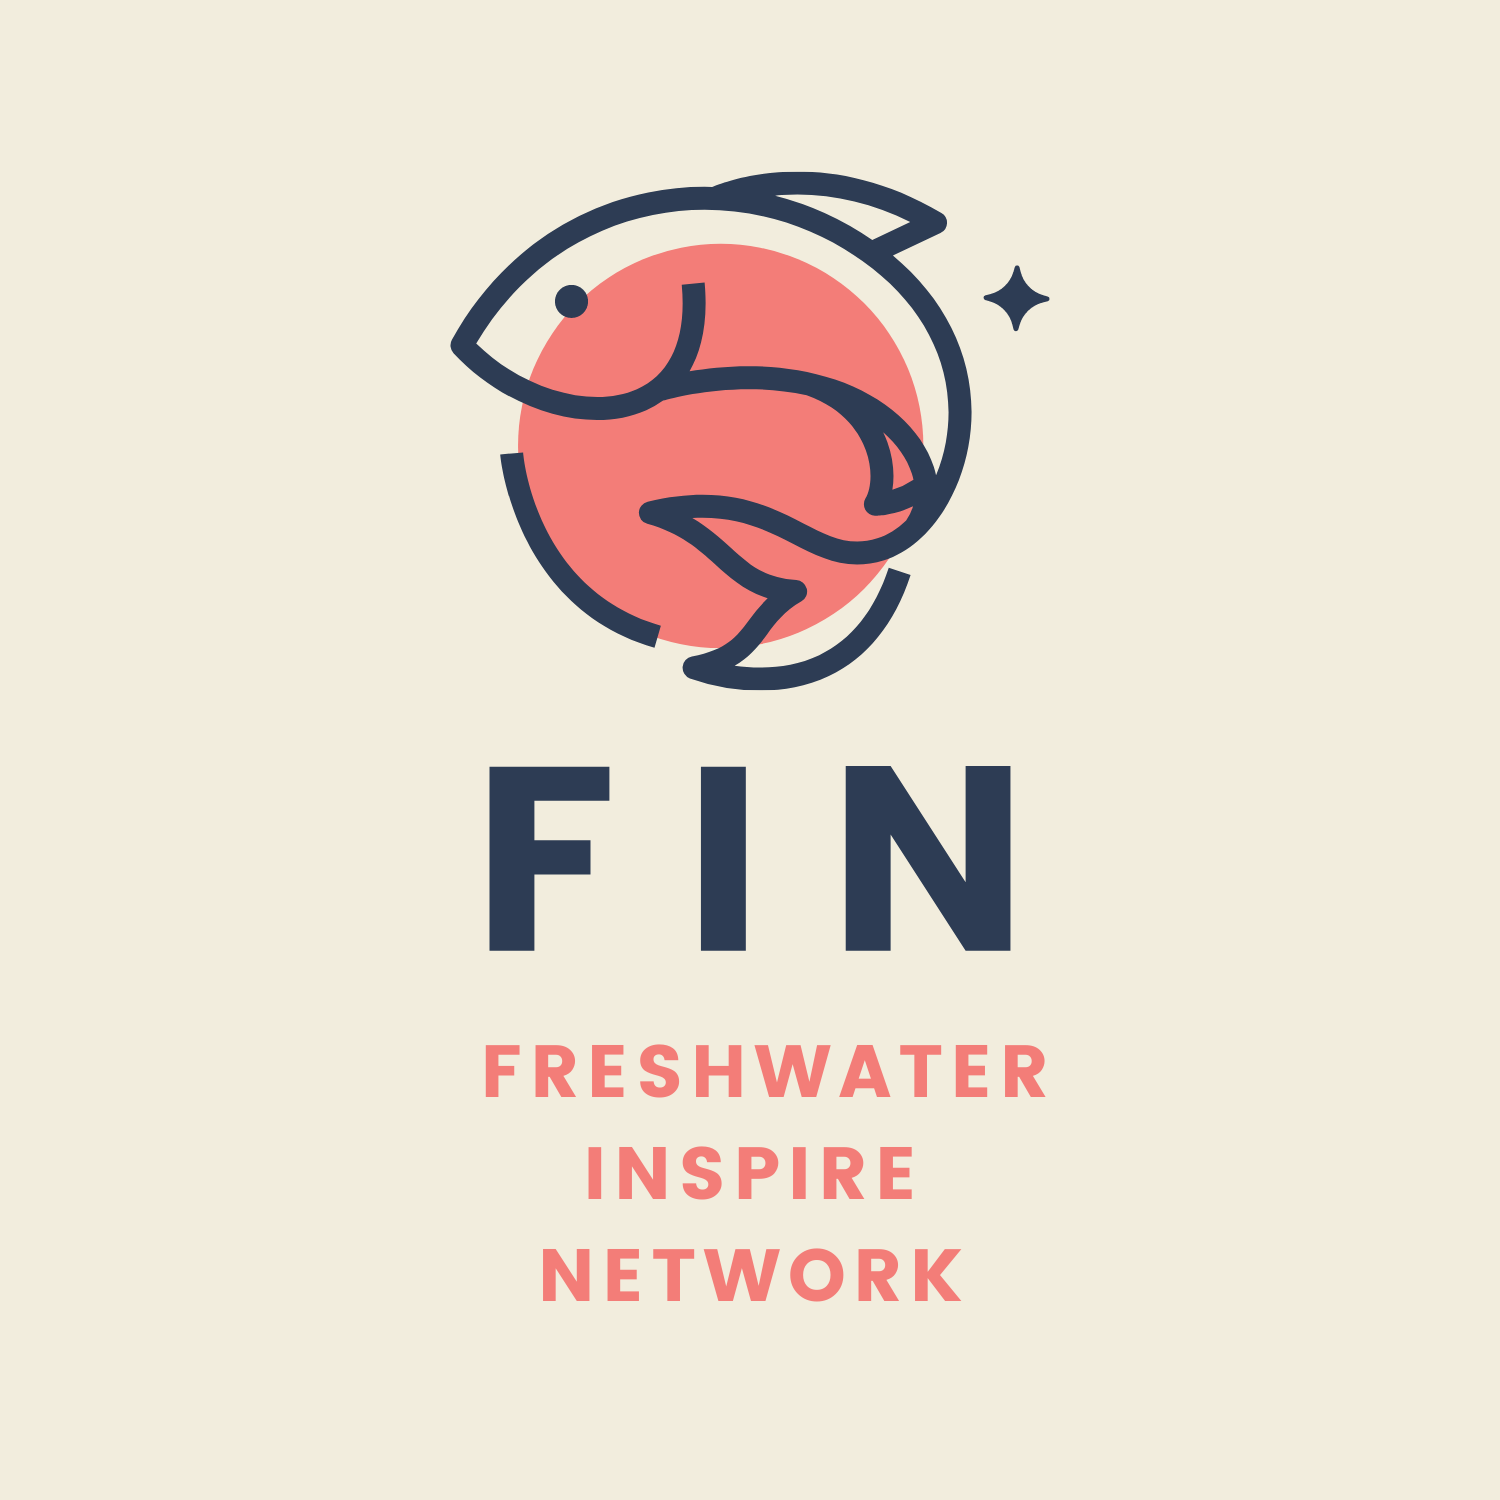 Illustrated logo for the Freshwater Inspire Network with a grey fish on a pink circle on a beige background.